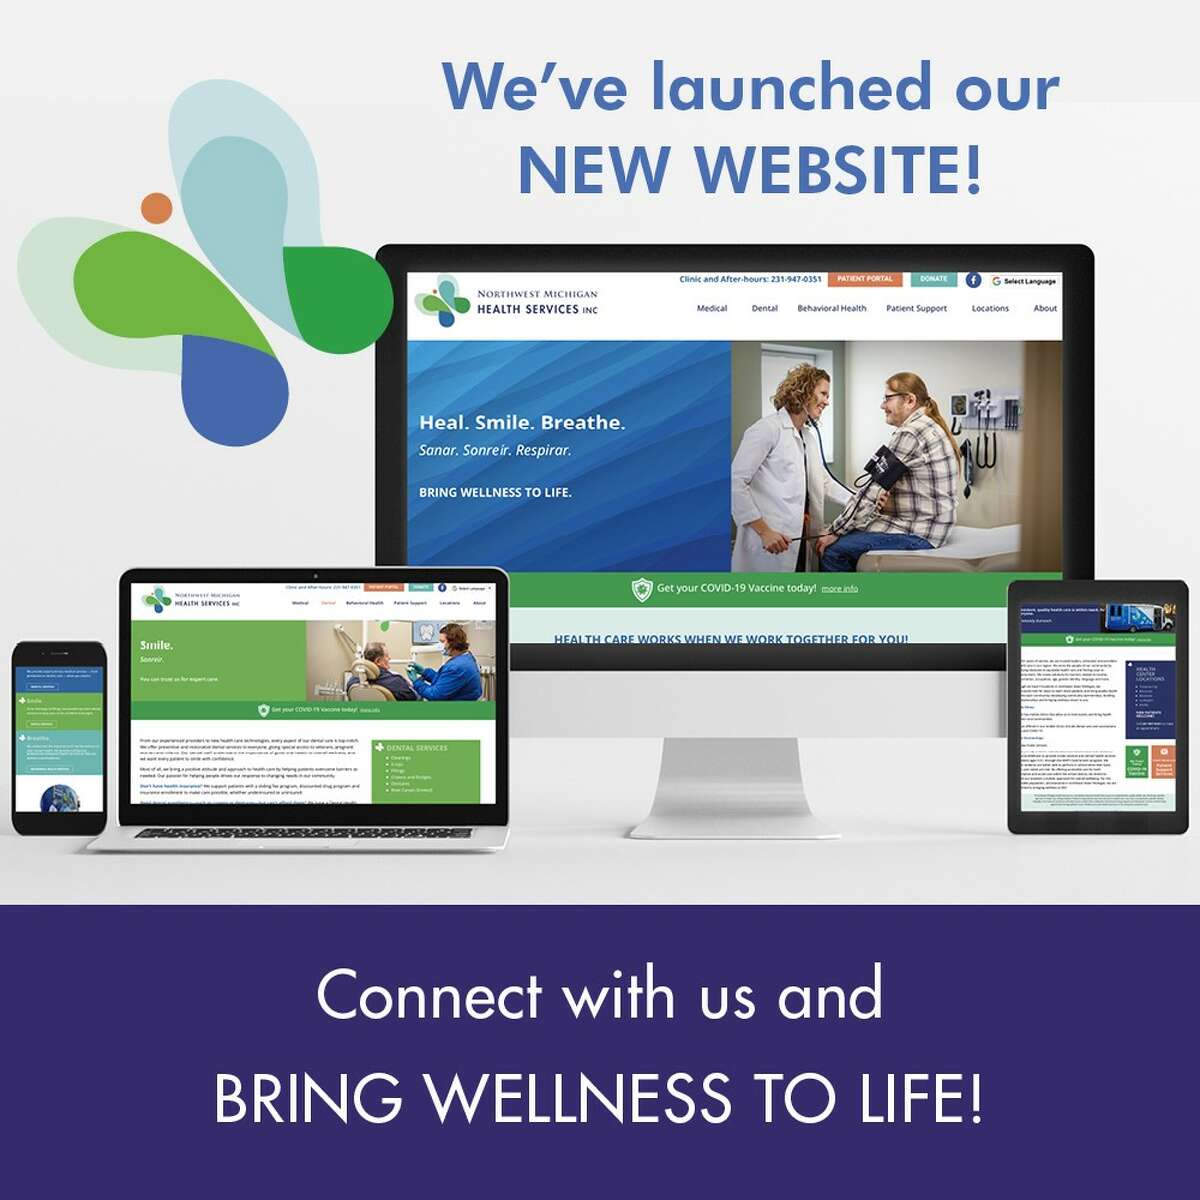 Northwest Michigna Health Services Inc announced on Thursday that is has a new website and is rebranding. 